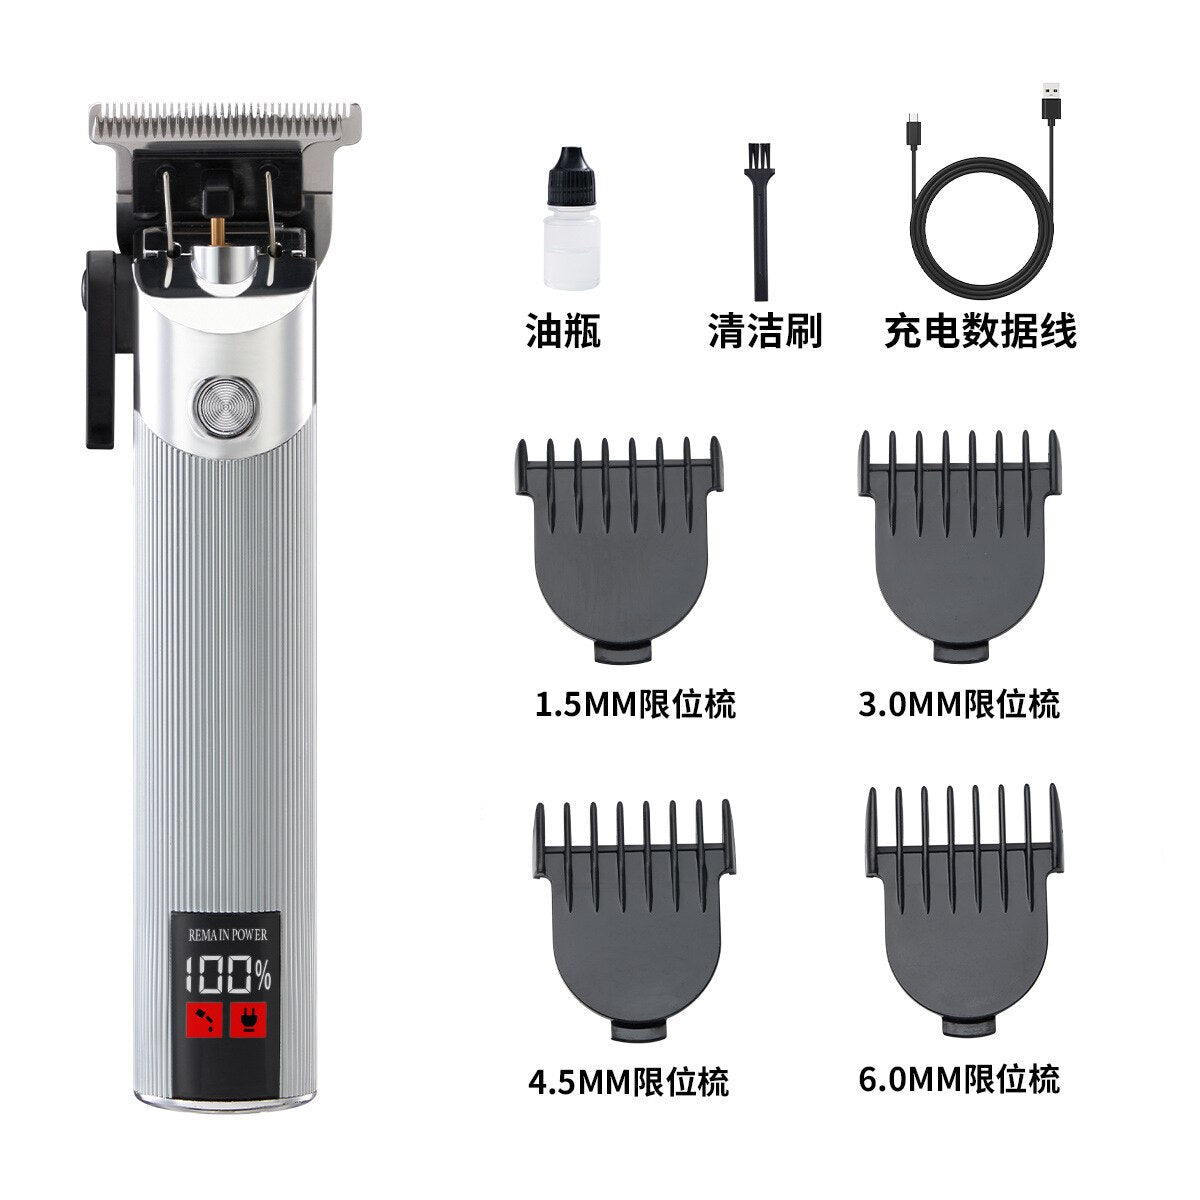 2023 Youpin Komingdon Hair Trimmer Barber LCD Display Hair Clipper Machine USB Rechargeable Hair Cutting Beard Trimmer for Men